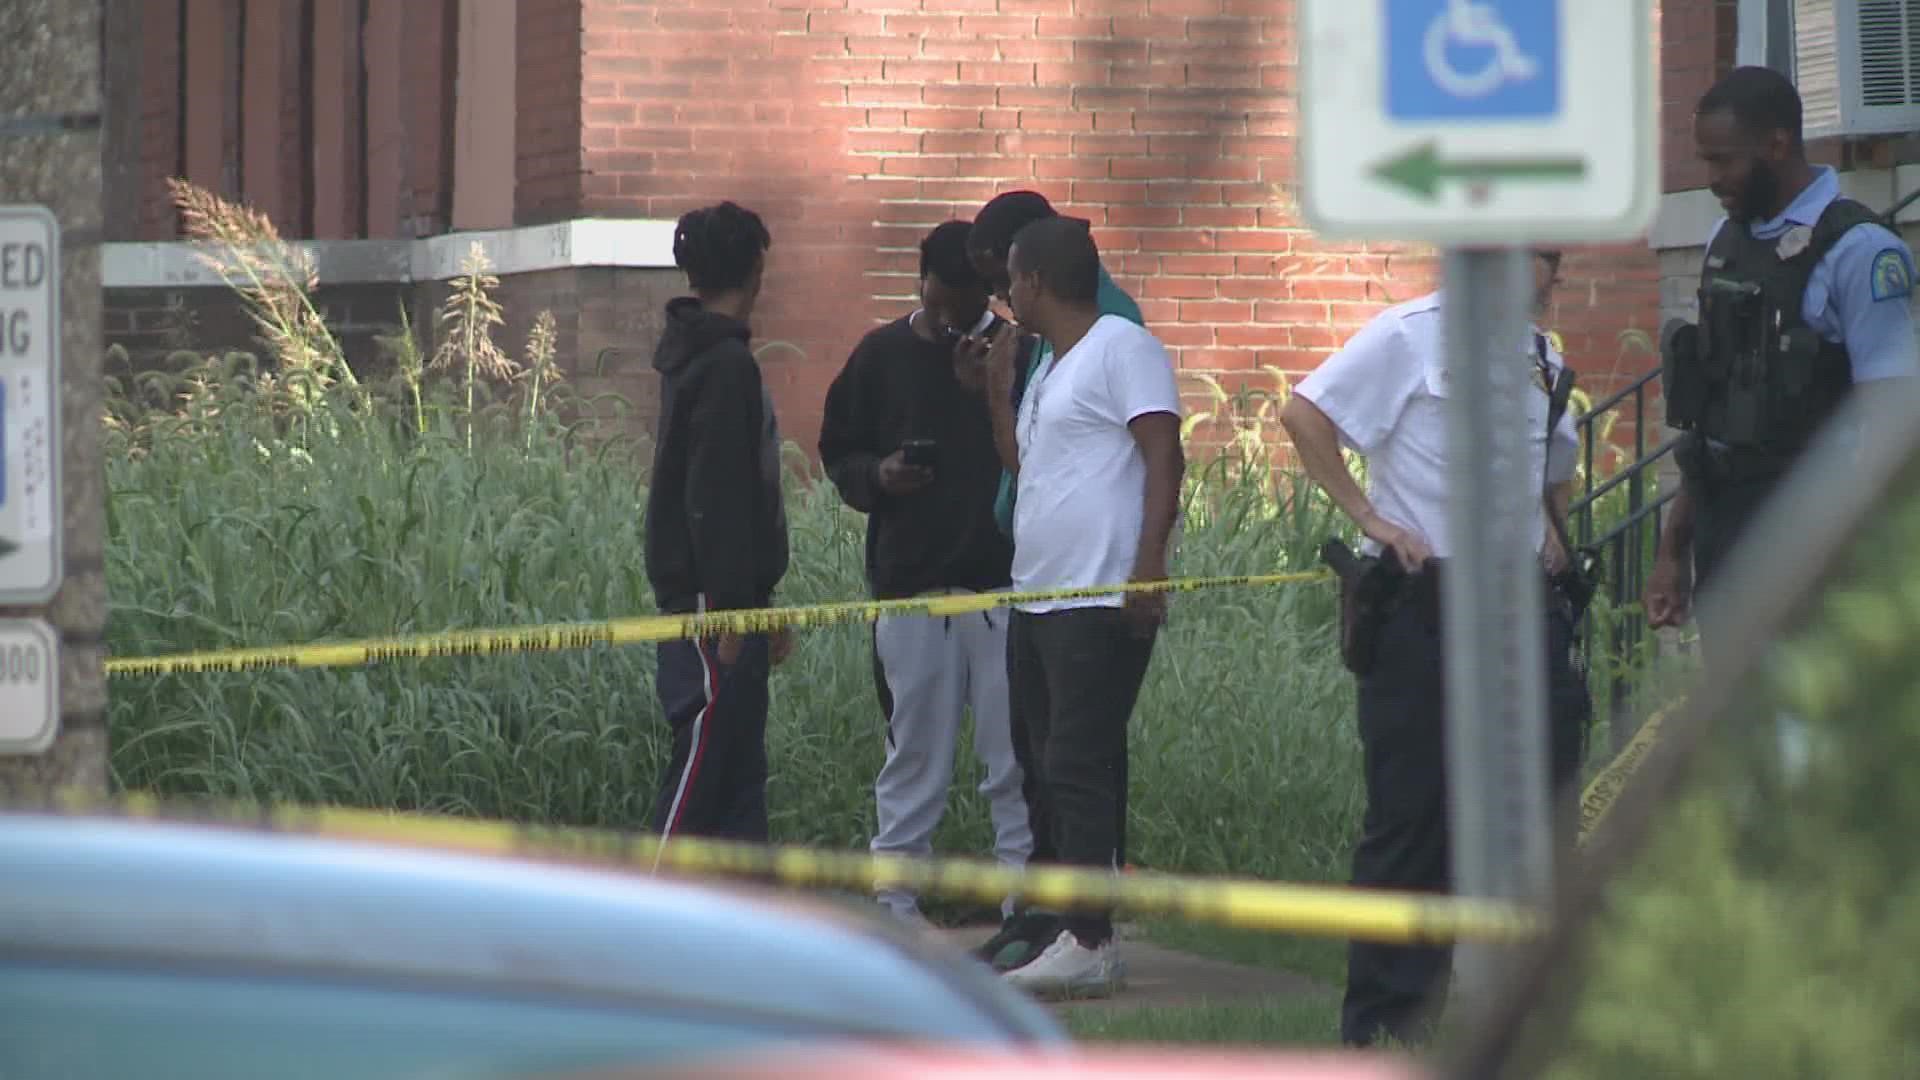 A 16-year-old and 9-year-old were shot on Monday afternoon. Both victims are in critical condition, but they are stable.